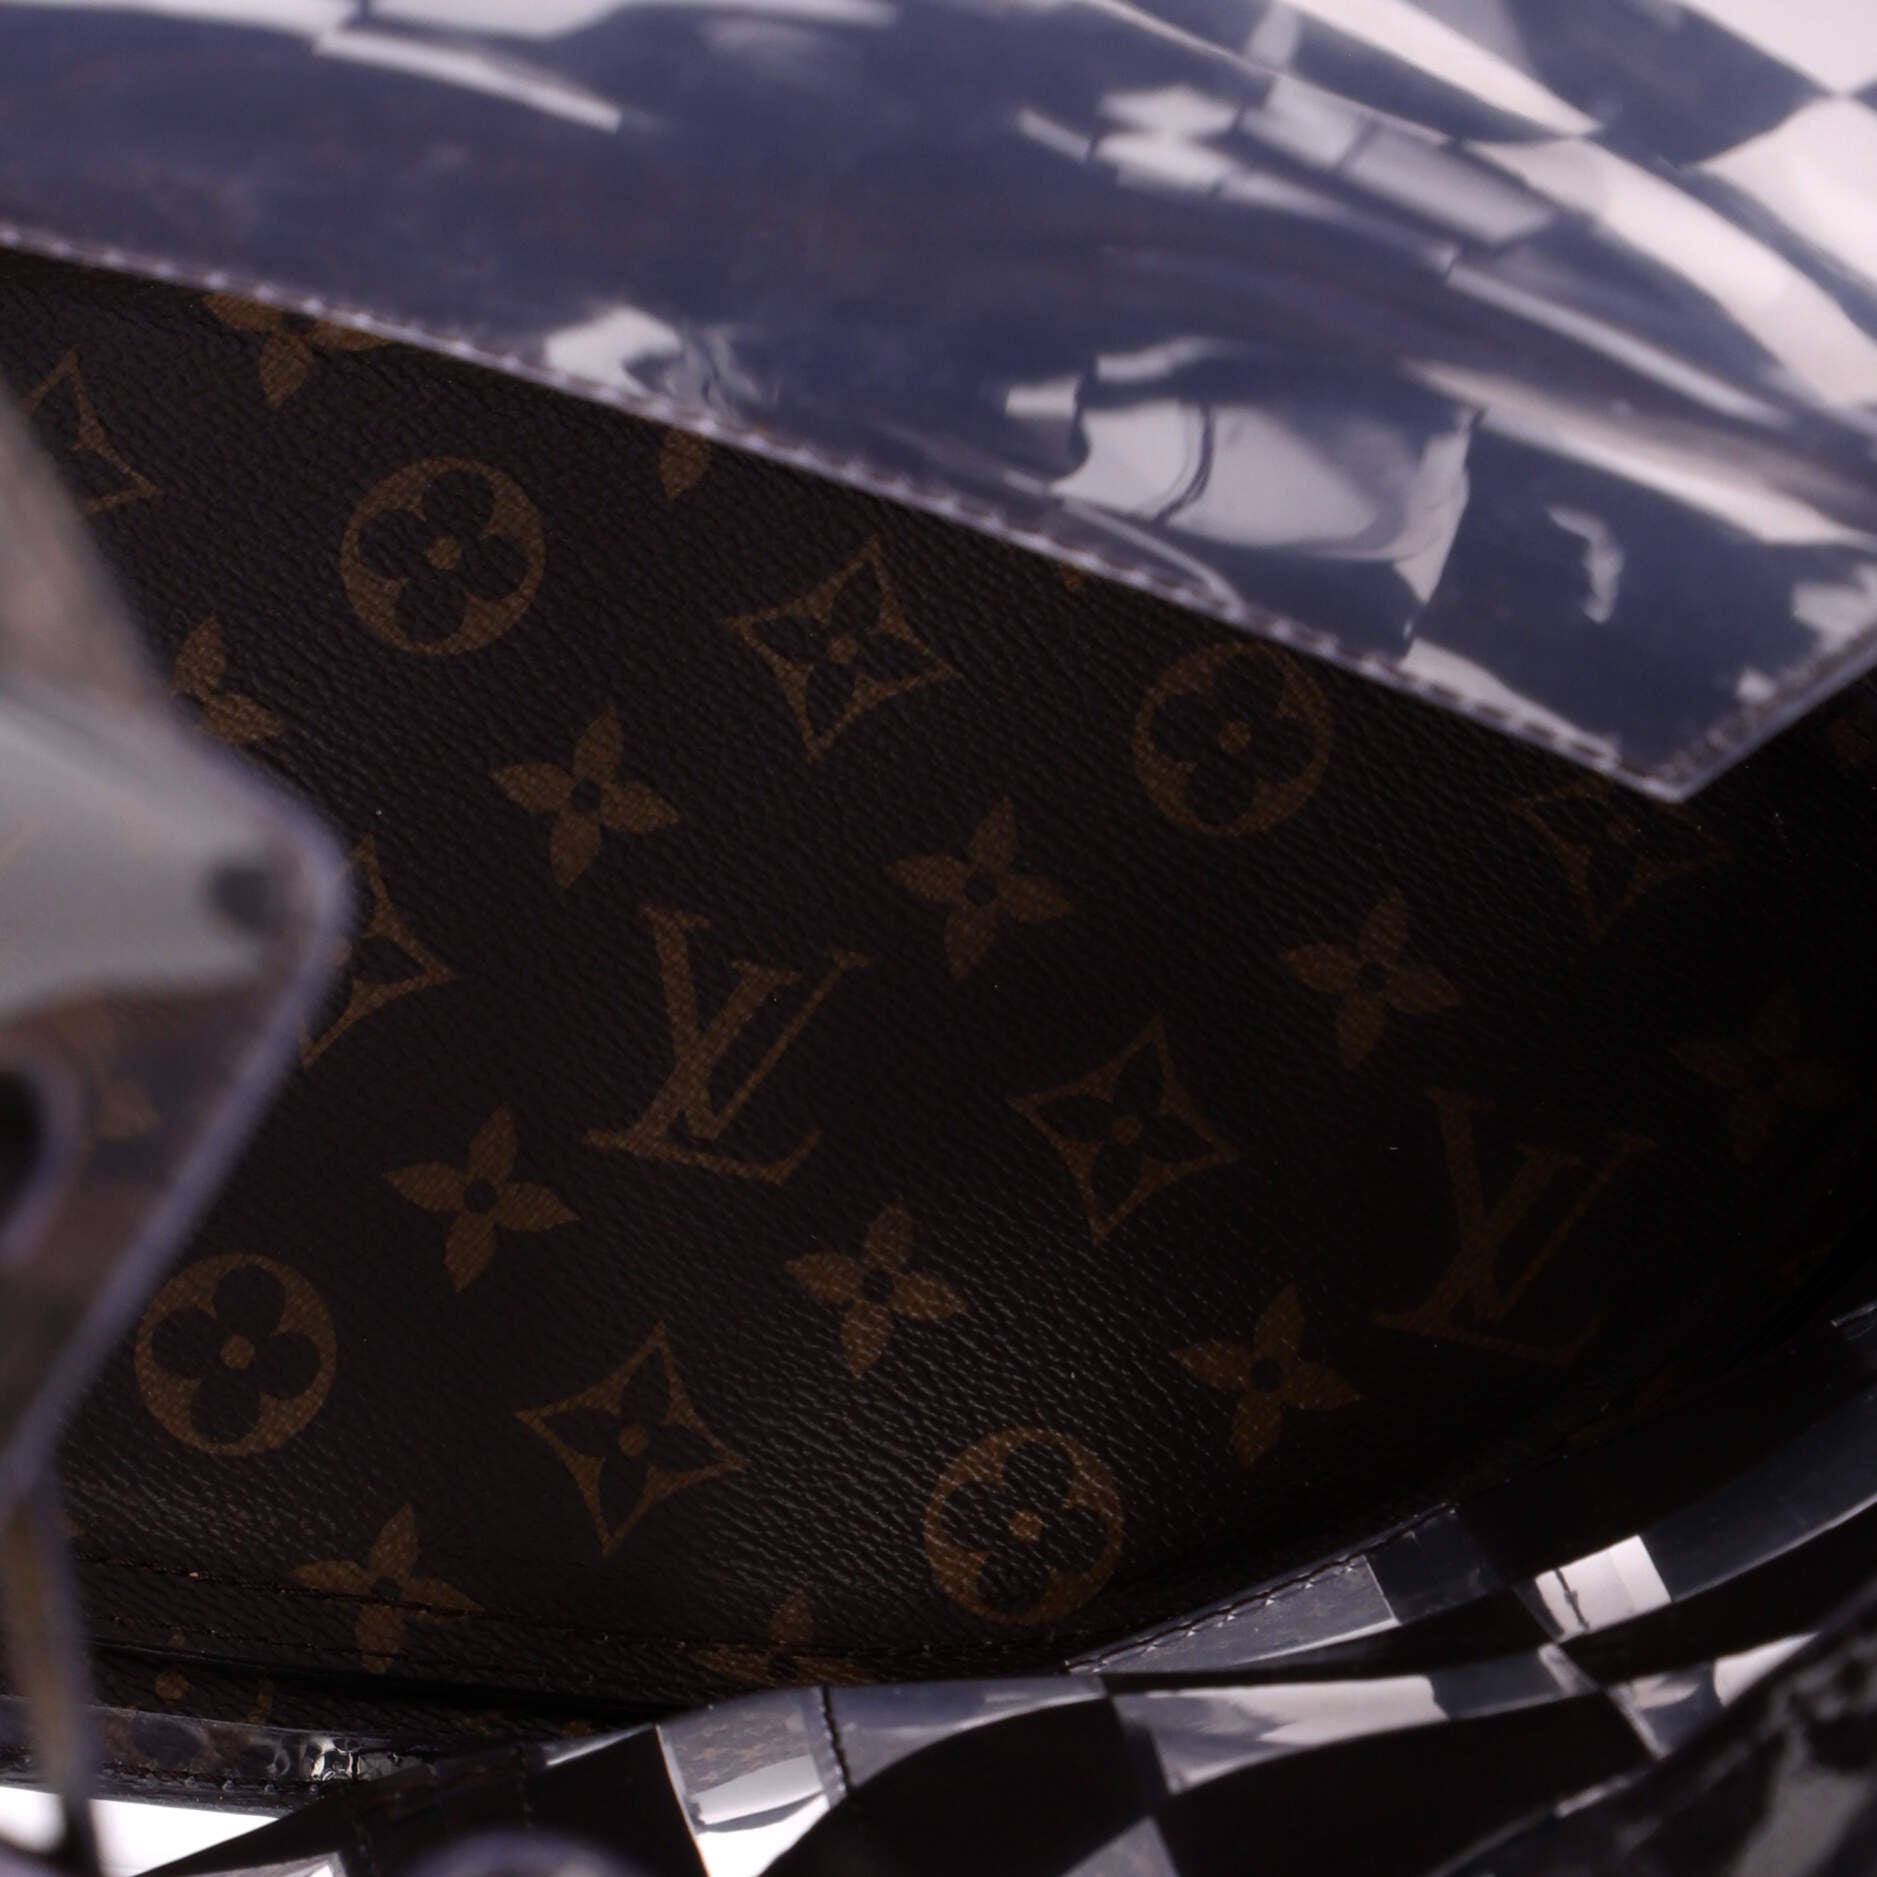 Louis Vuitton Christopher Backpack Limited Edition Monogram Chess Canvas  and PVC GM - ShopStyle